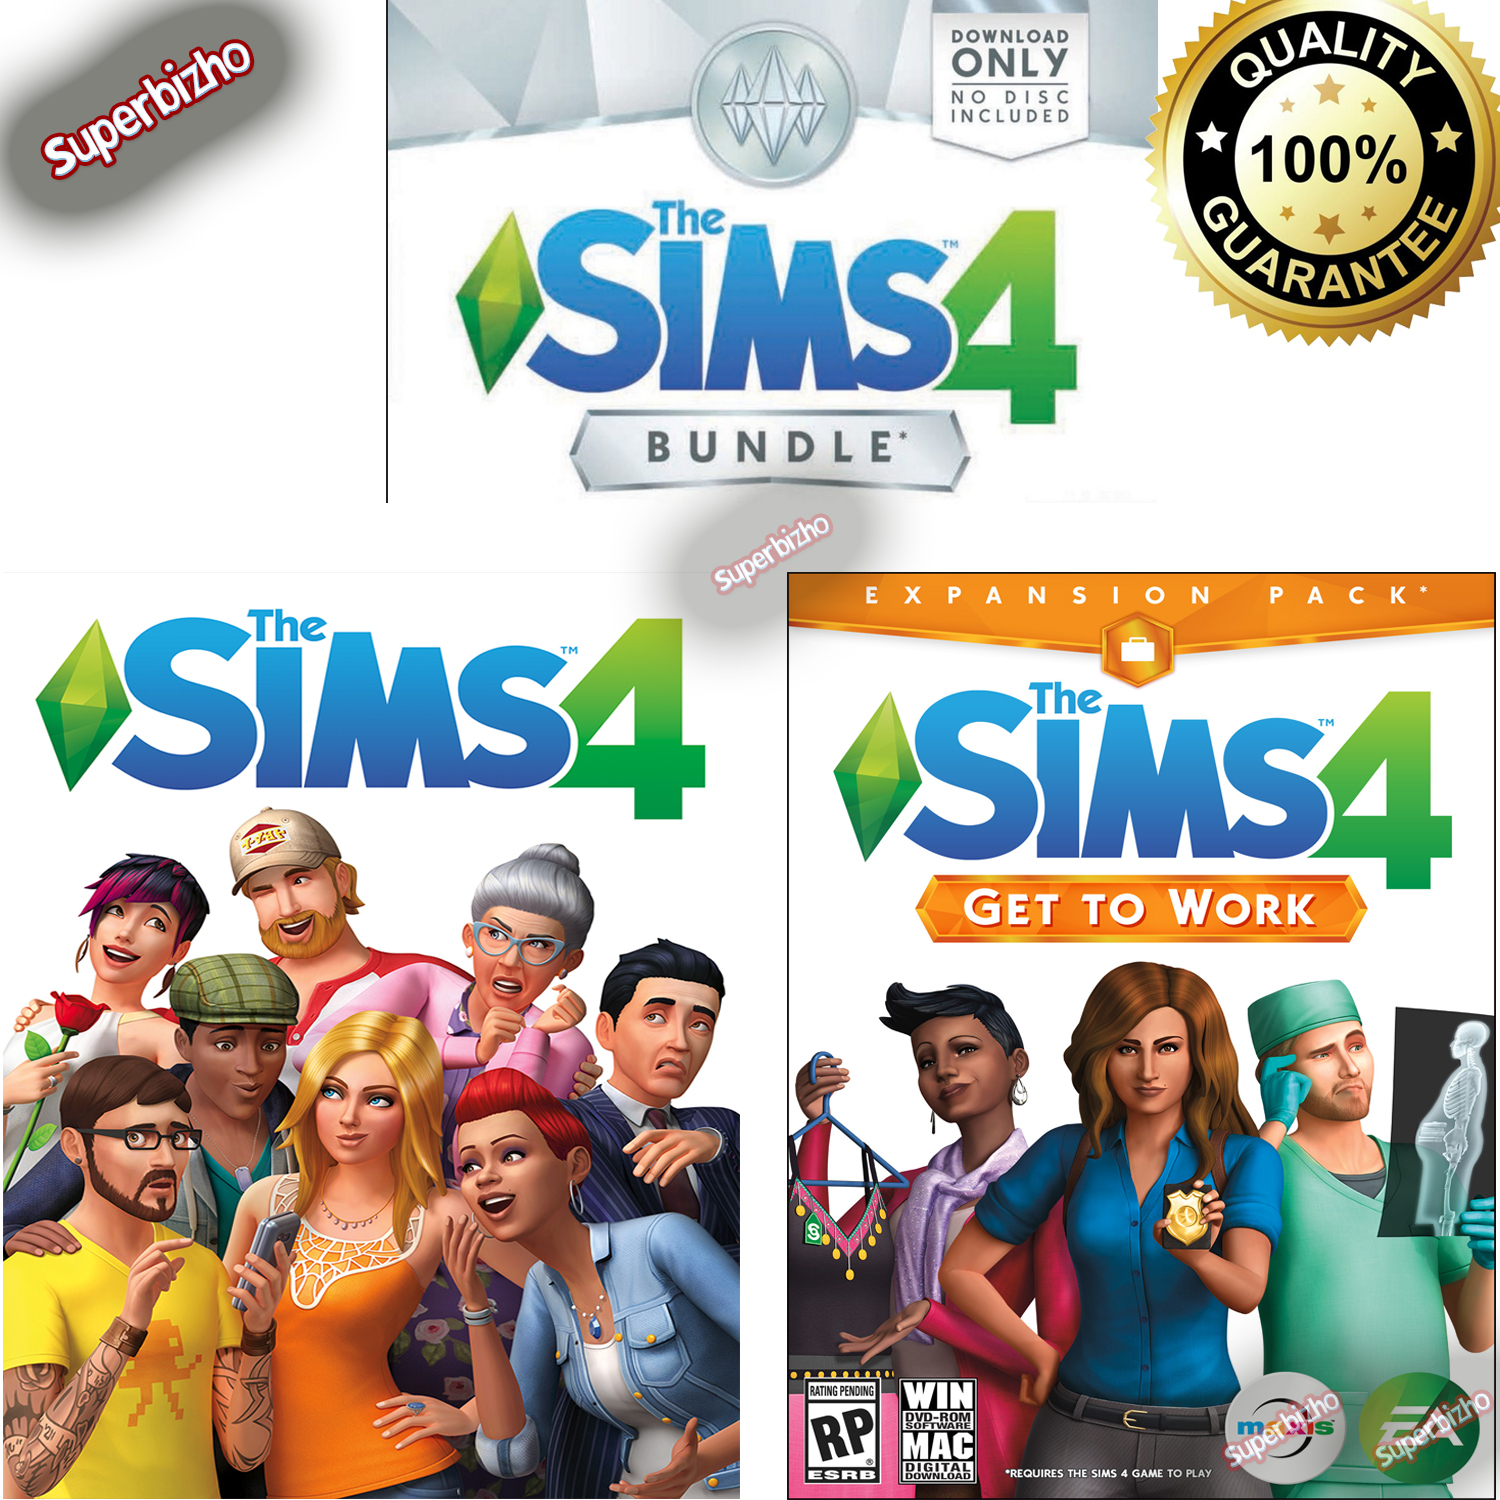 Sims 4 get to work expansion free download - app.emer-tech.co